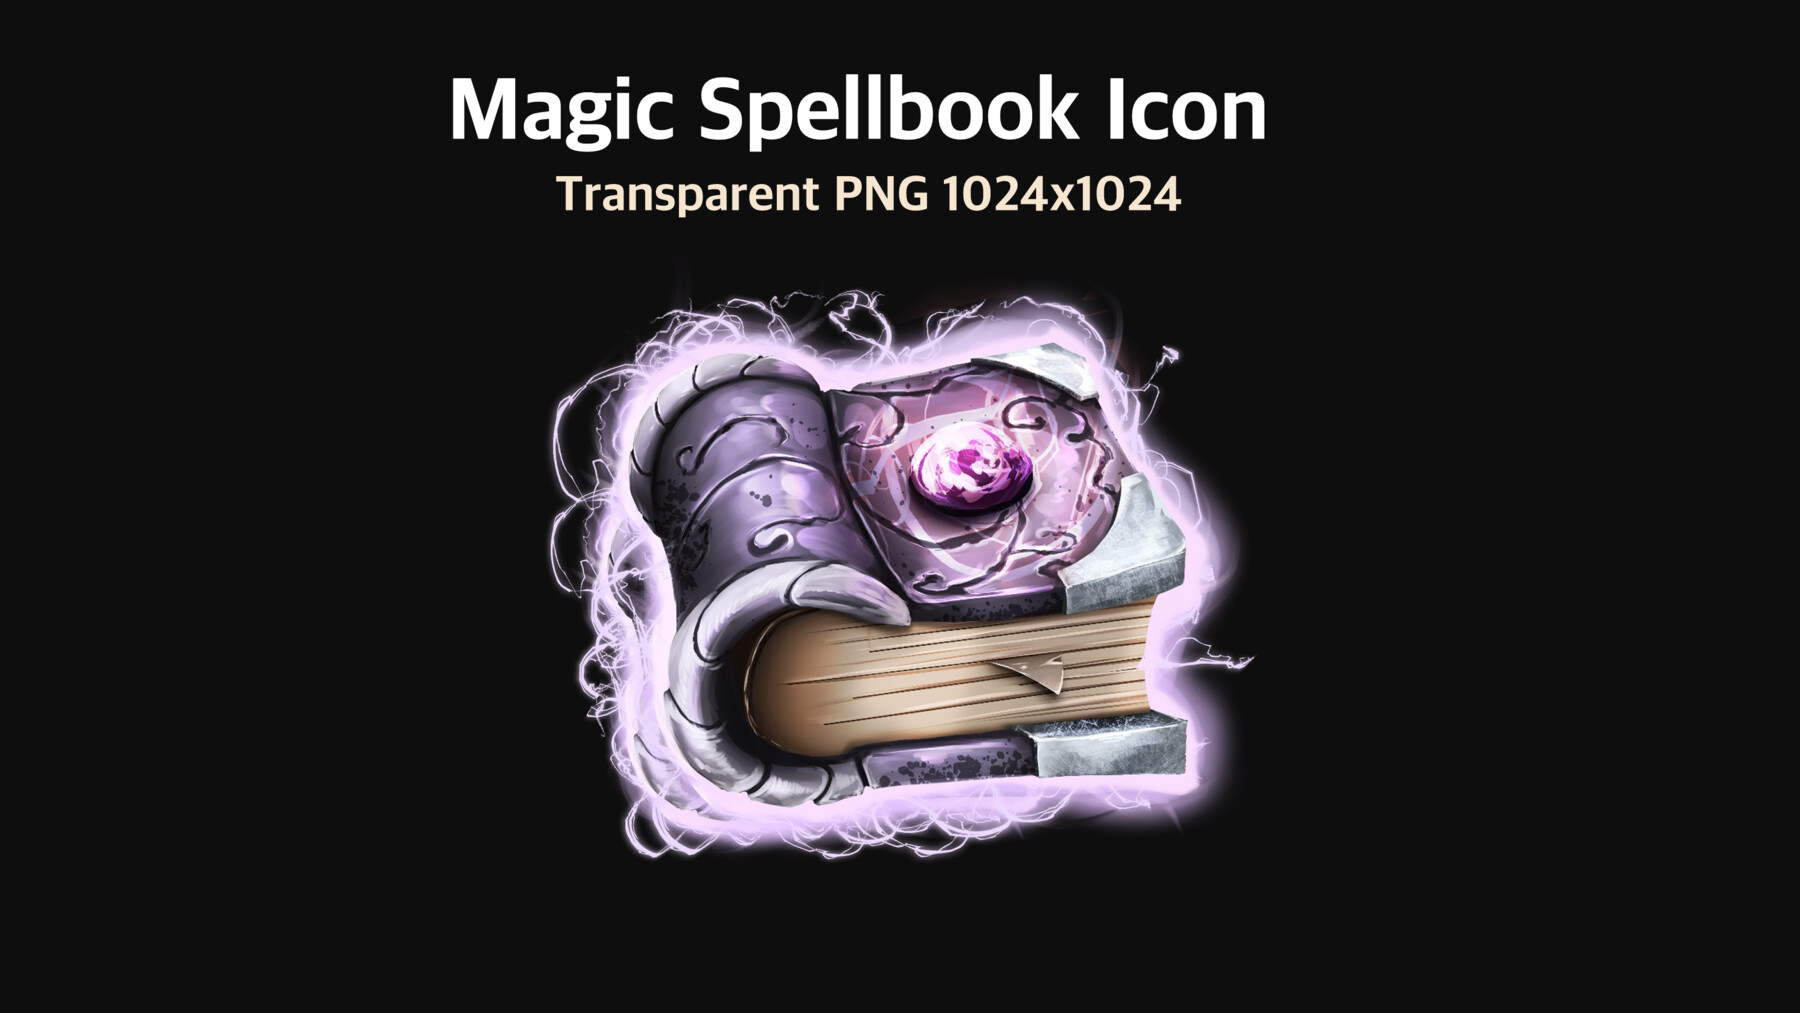 Magic Books in 2D Assets - UE Marketplace